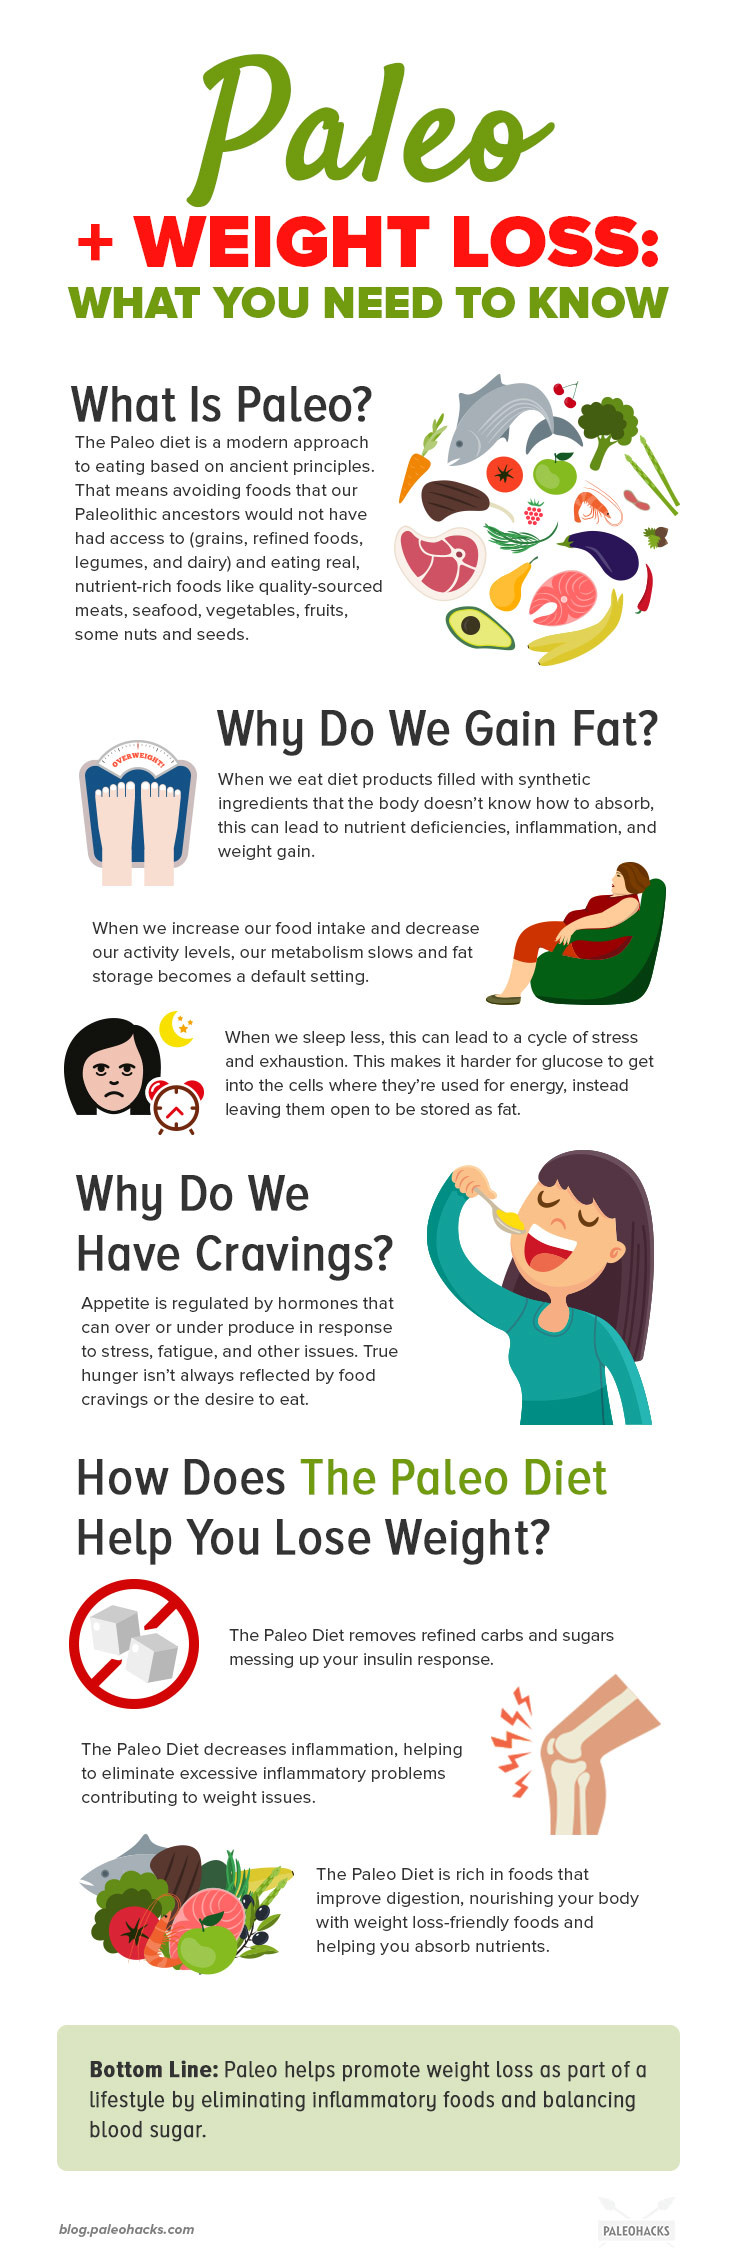 Paleo Diet Weight Loss Meal Plan
 The 7 Day Natural Paleo Weight Loss Meal Plan